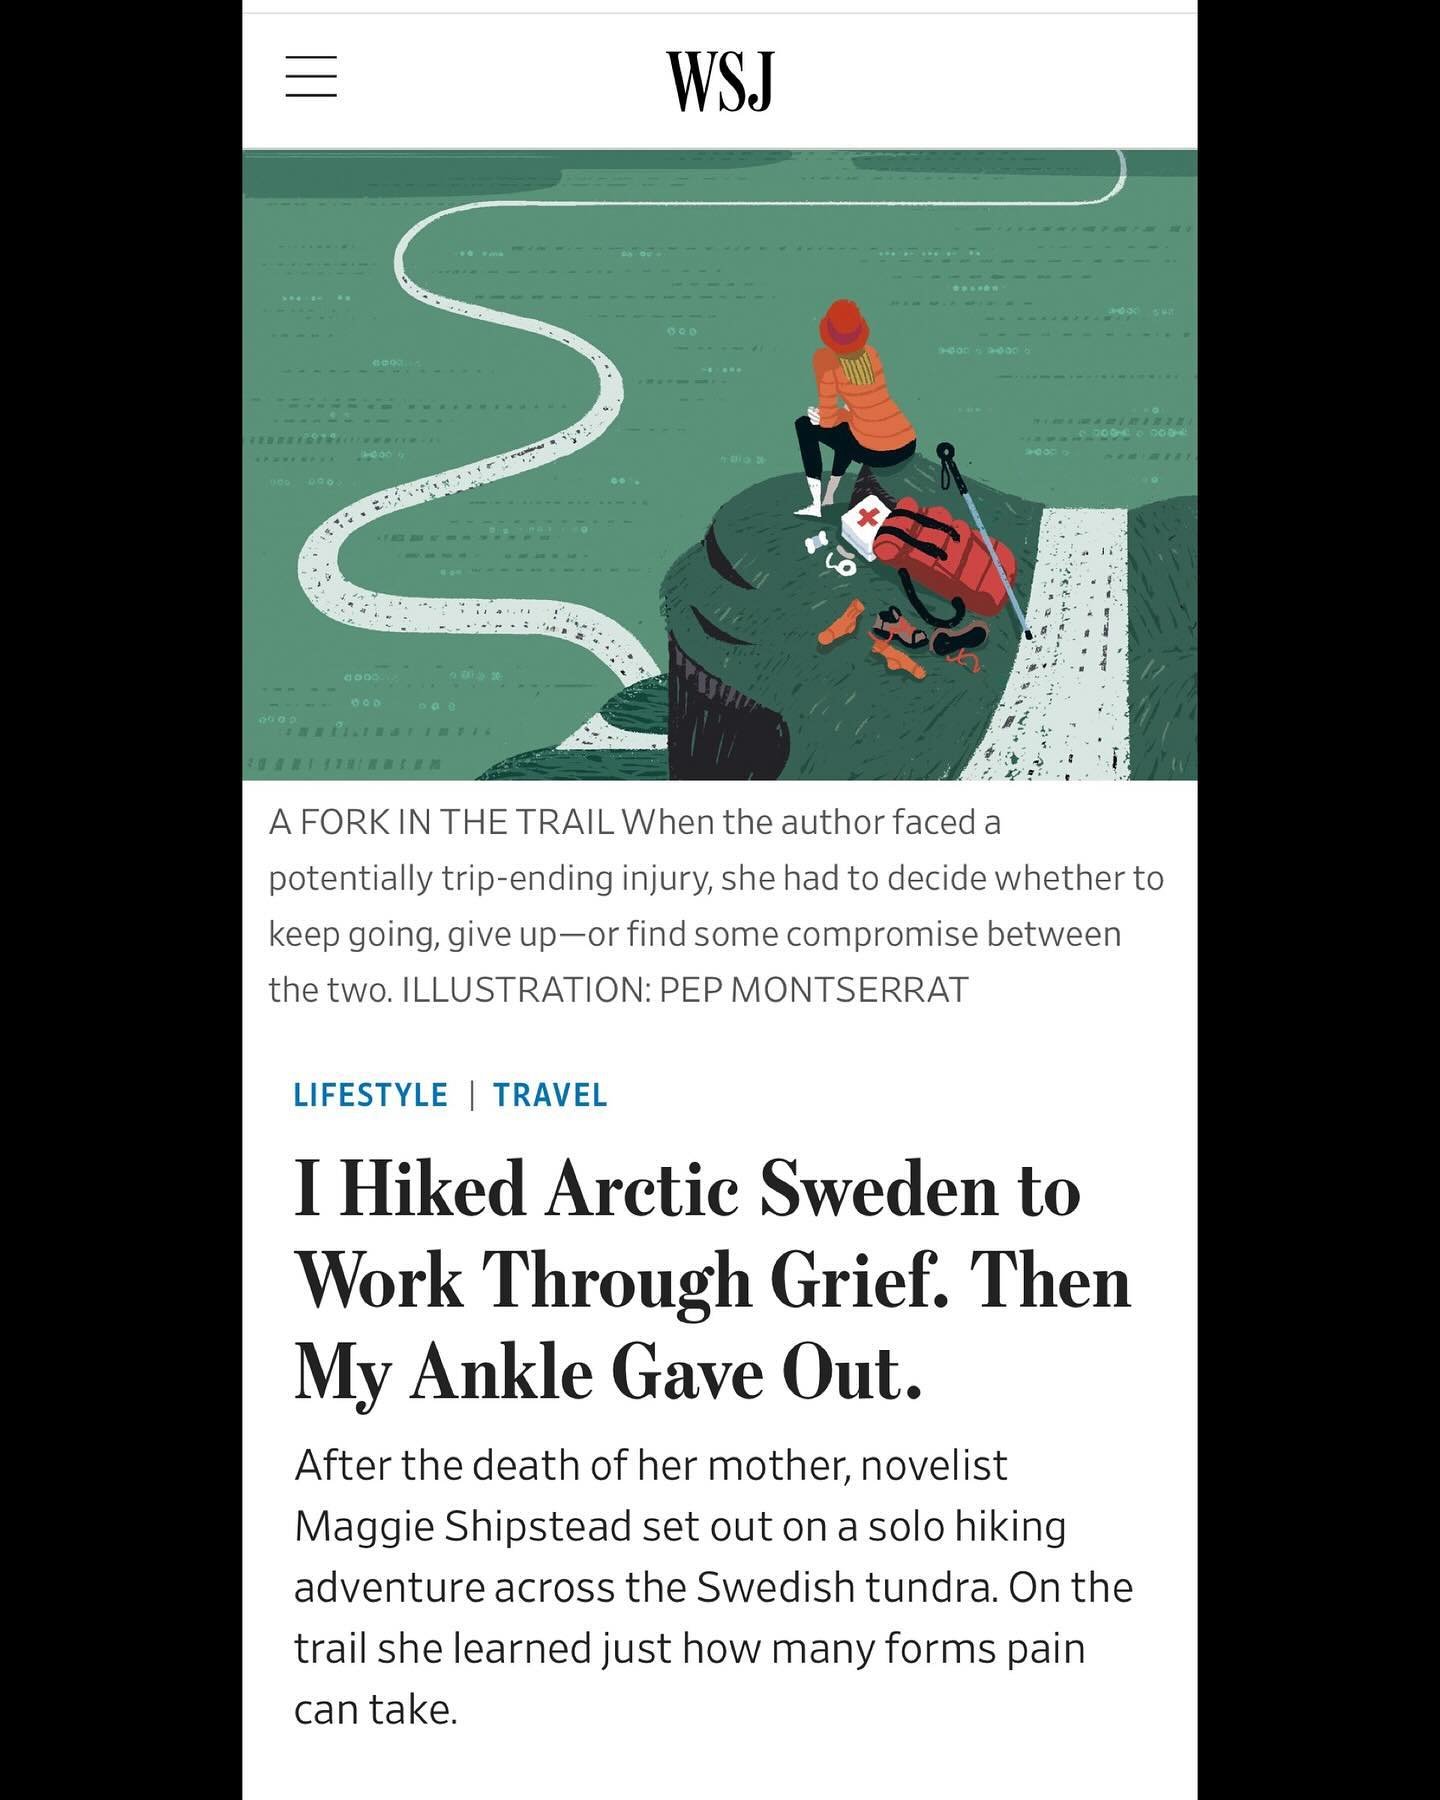 I wrote a Traveler&rsquo;s Tale for @wsjoffduty about when my ankle gave out while I was hiking the Kungsleden in 2022 after my mom died. Thanks to @sebmodak for the opportunity and the edit&mdash;it&rsquo;s not the lightest topic, but bringing this 